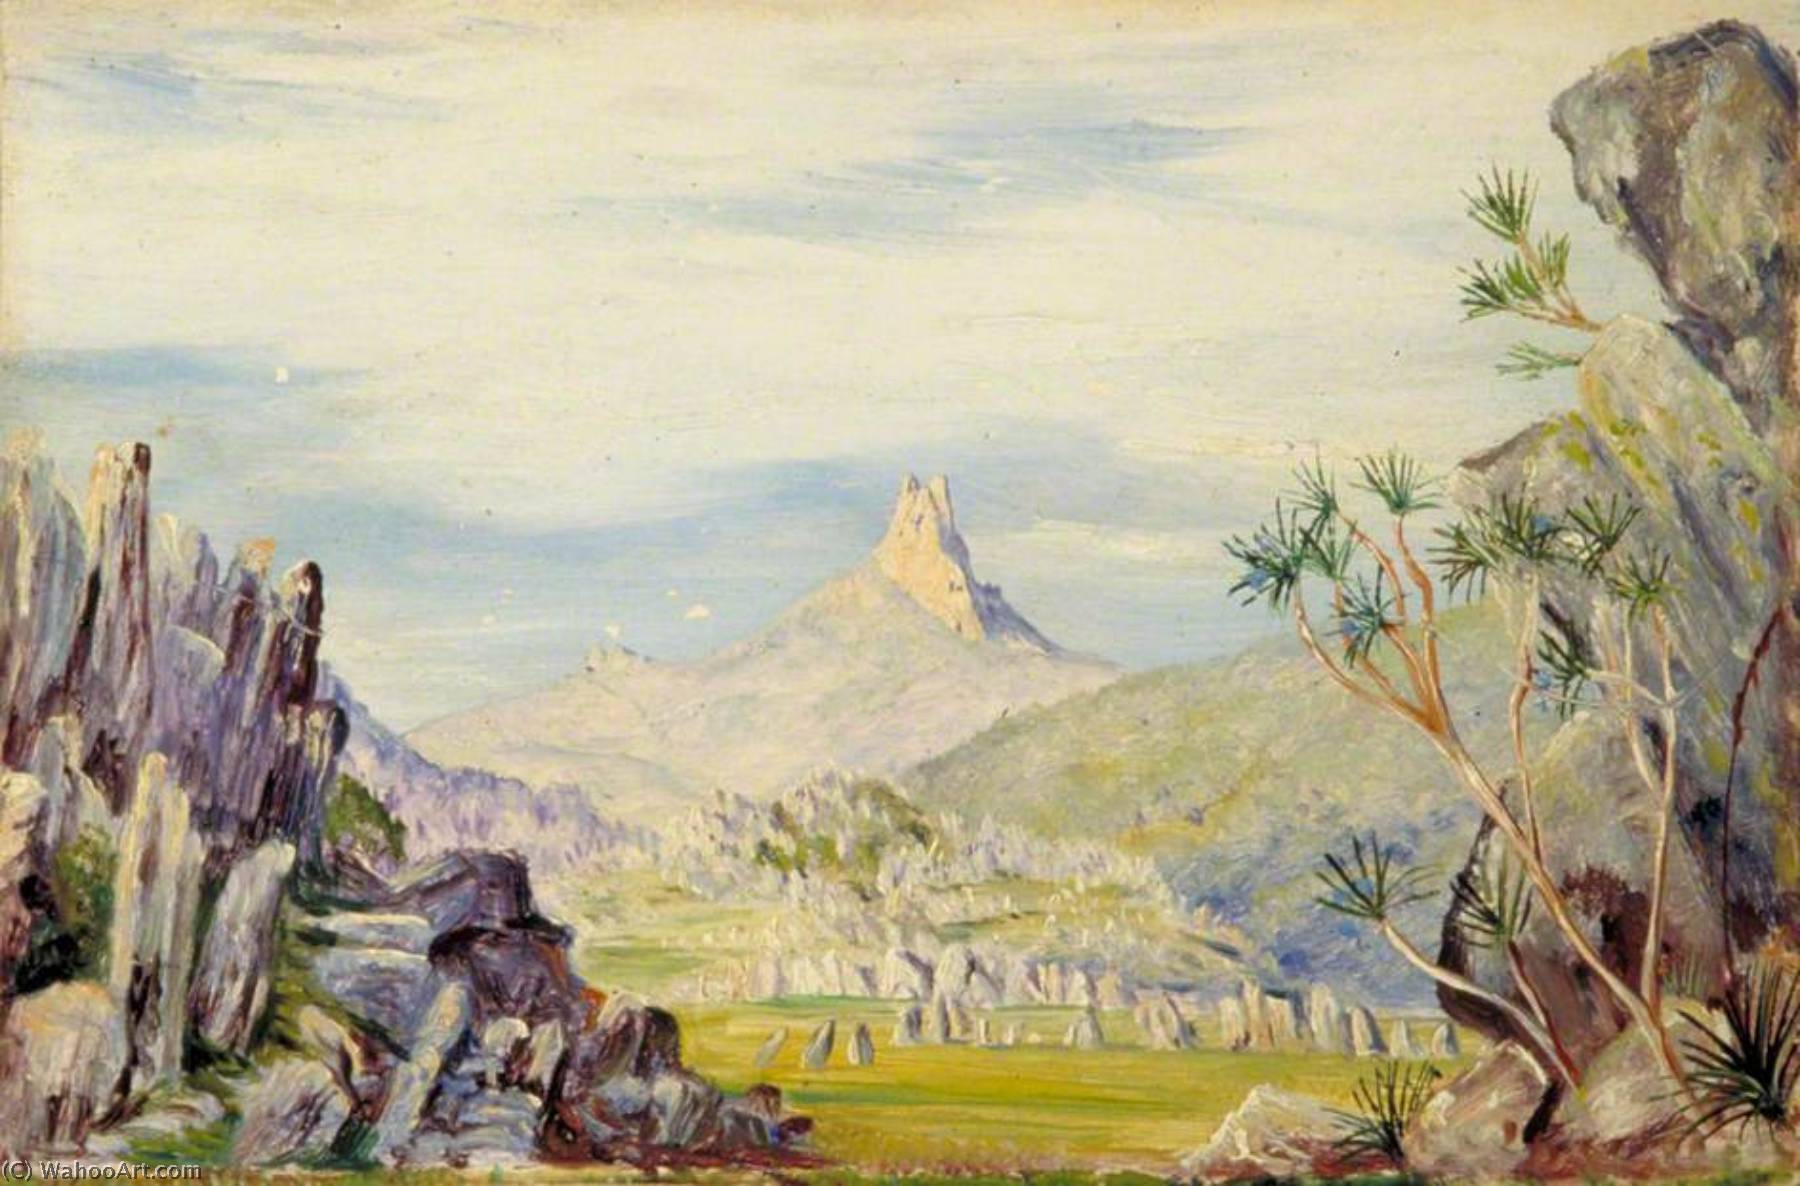 Buy Museum Art Reproductions Peak of Casa Branca with Its Iron Rocks and Tree Lilies, Brazil, 1873 by Marianne North (1830-1890, United Kingdom) | ArtsDot.com